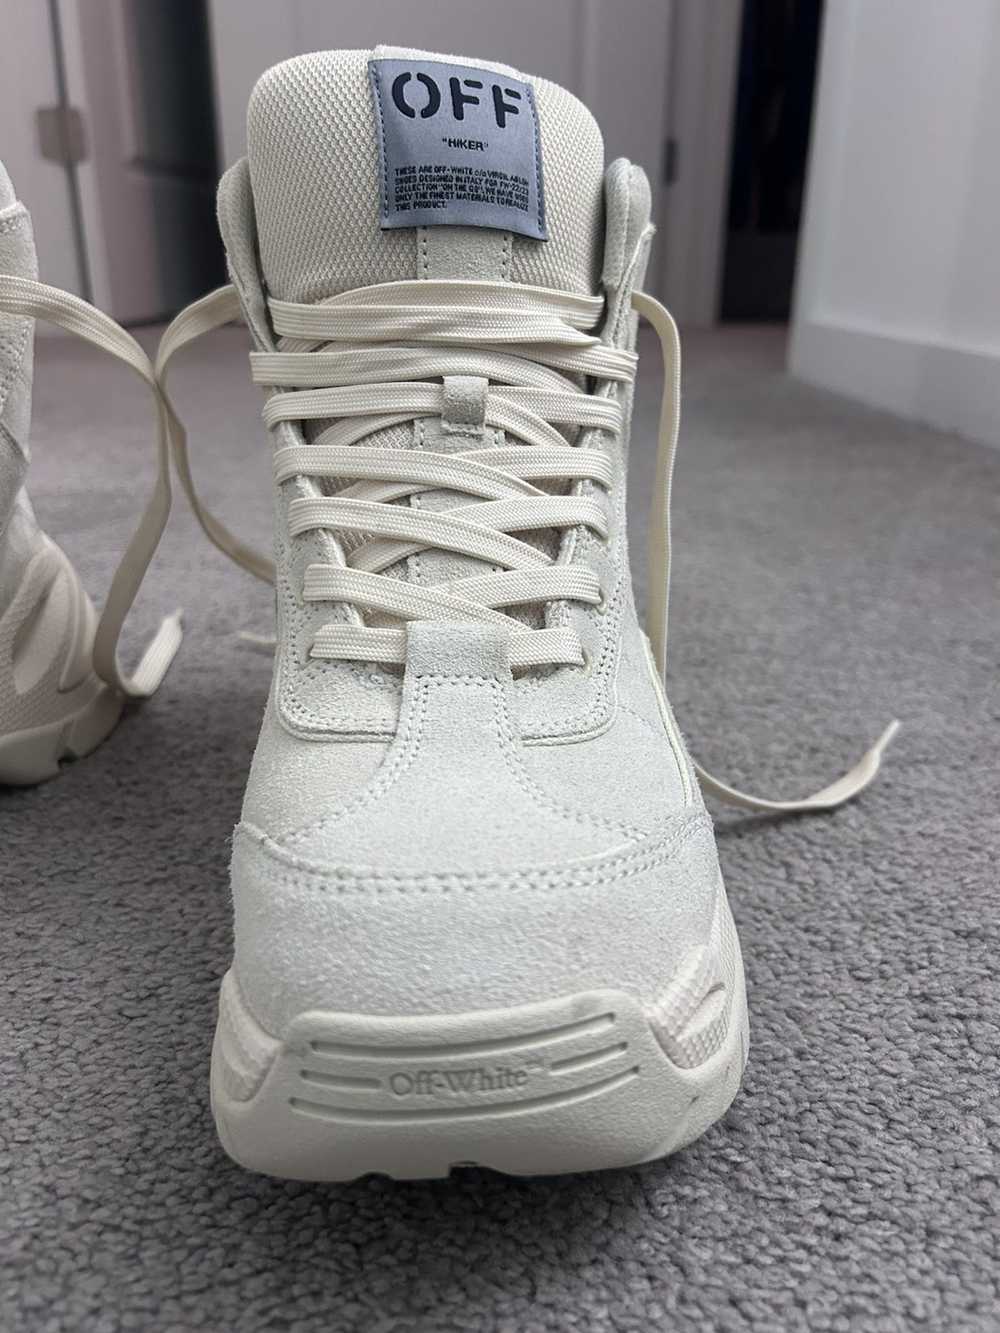 Off-White Hiker High Top Sneakers - image 3